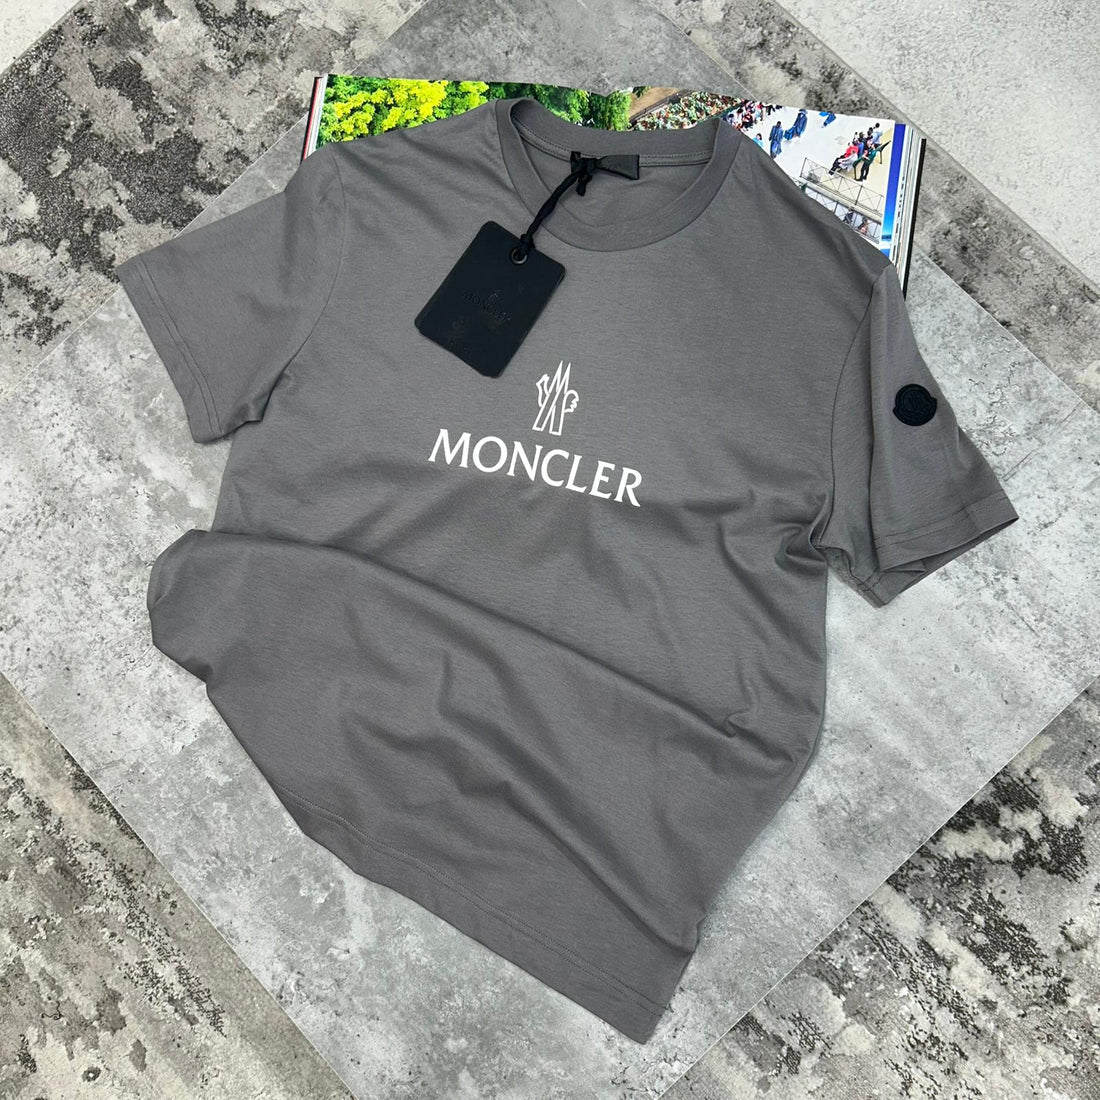 Moncler Tshirts (click for latest available Tshirts)